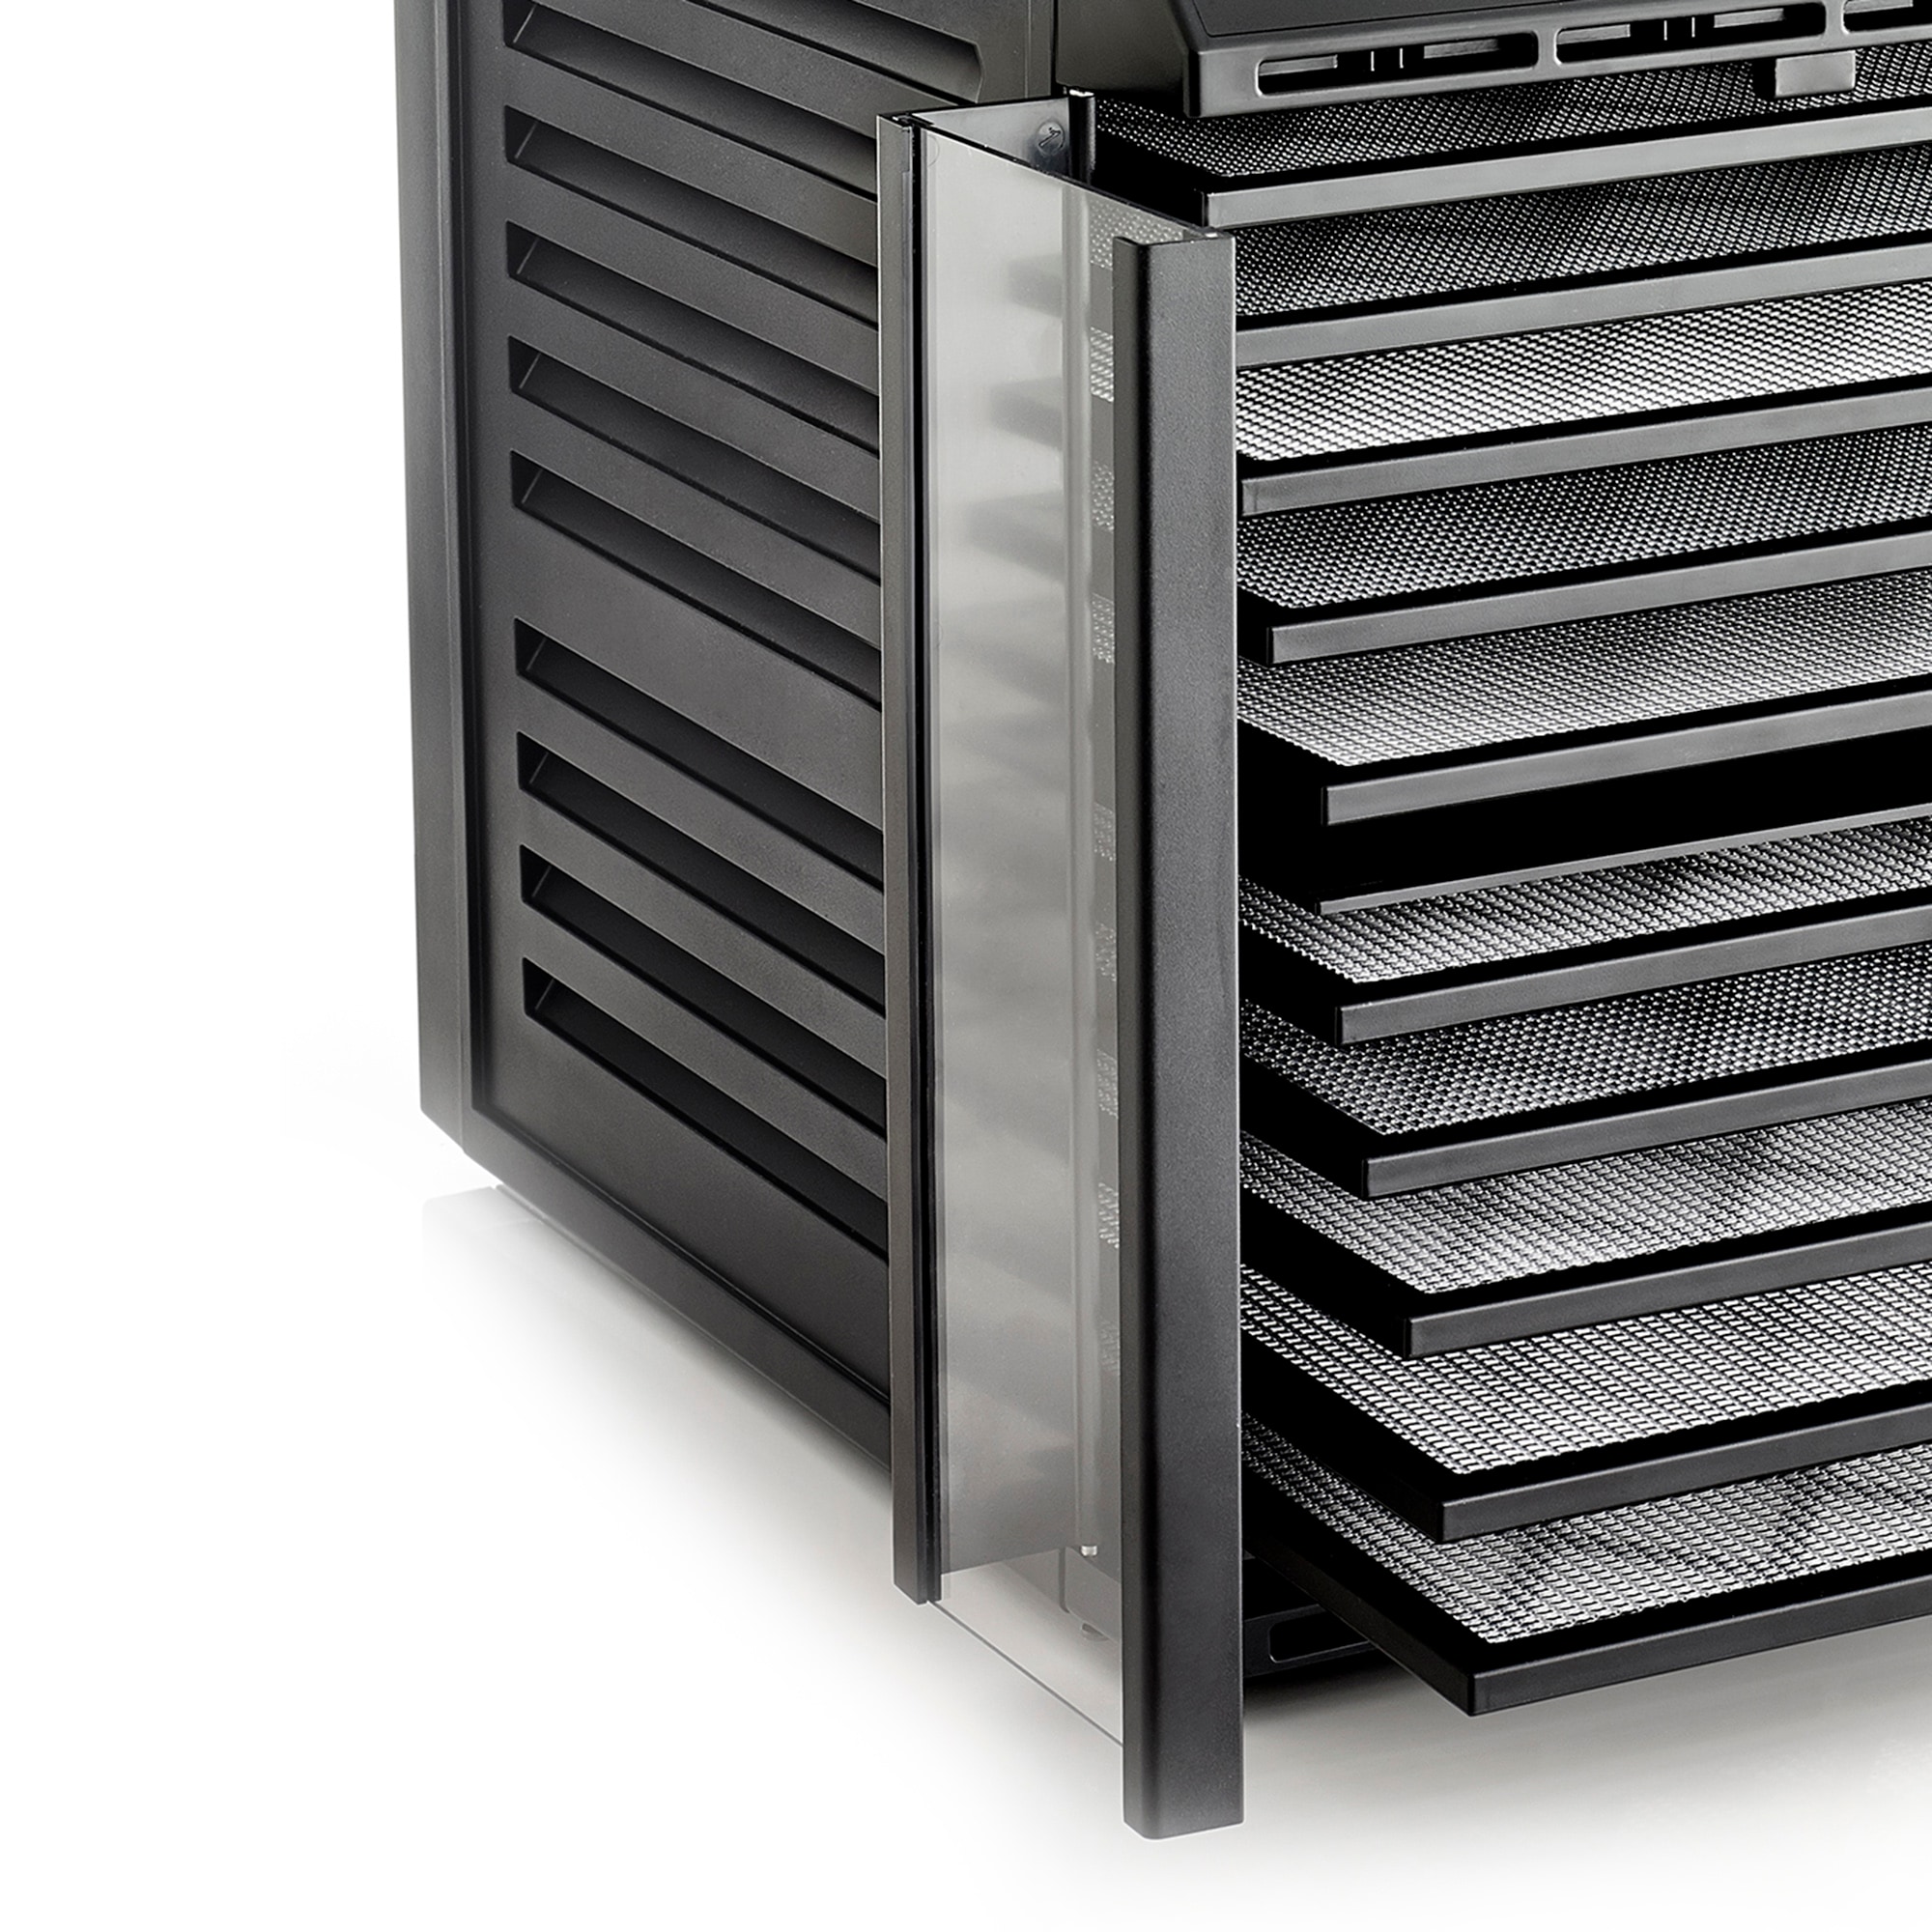 Excalibur 10 Tray Performance Digital Dehydrator, in Stainless Steel  (DH10SSSS13) - Excalibur Dehydrator